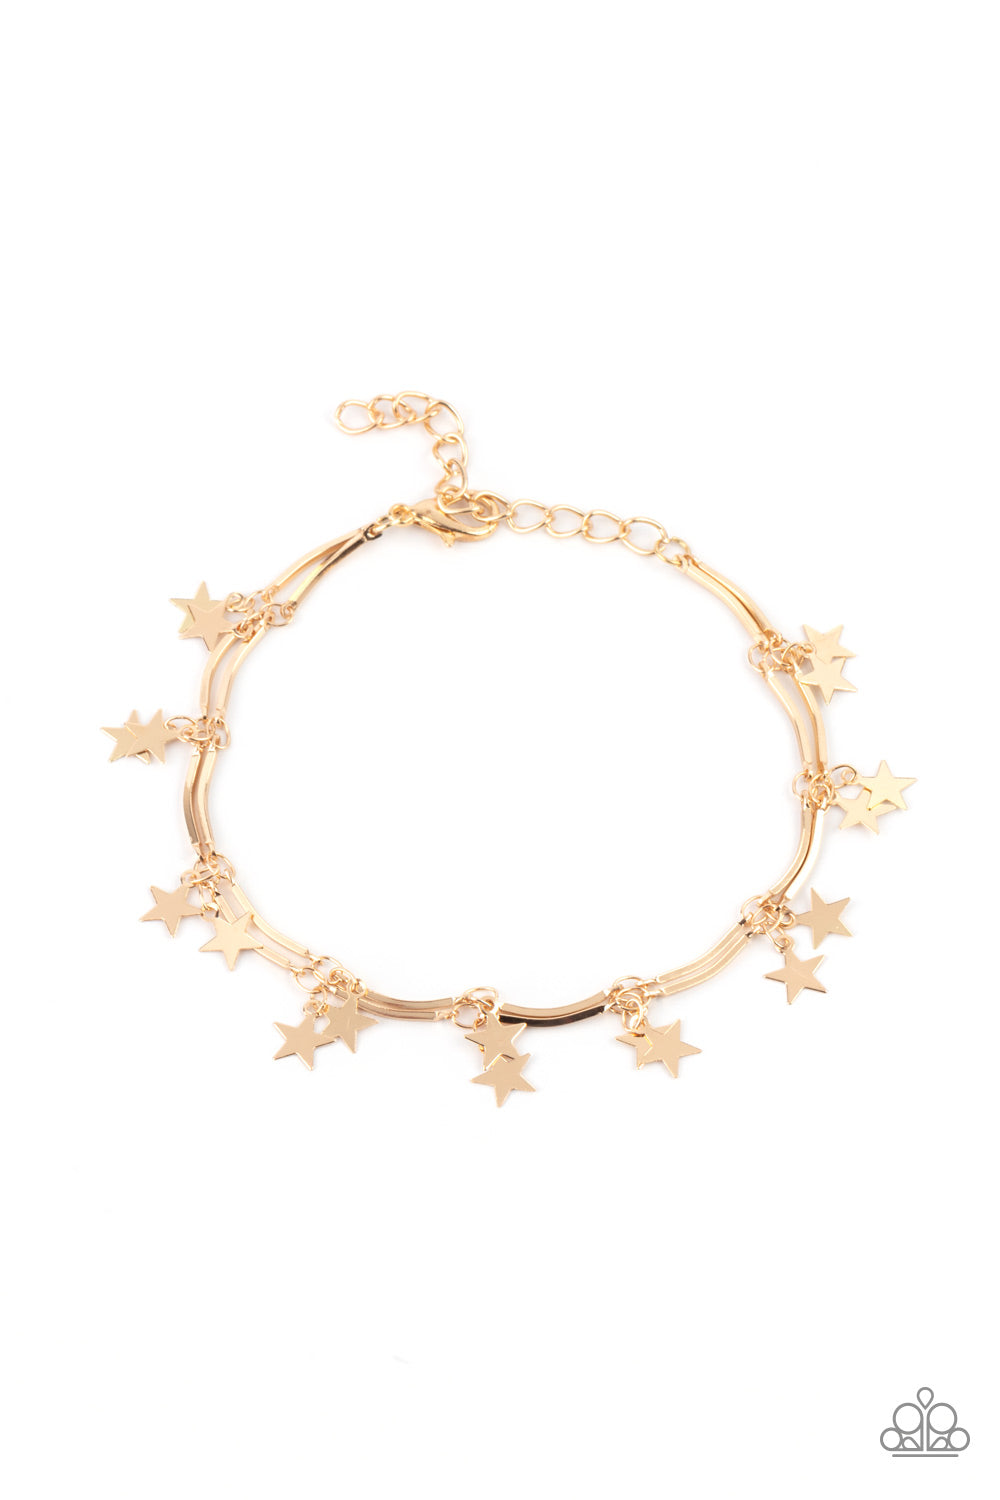 Party in the USA - Gold Star Bracelet - Paparazzi Accessories - A collection of dainty gold stars and curved gold bars delicately connect around the wrist, creating a stellar fringe.